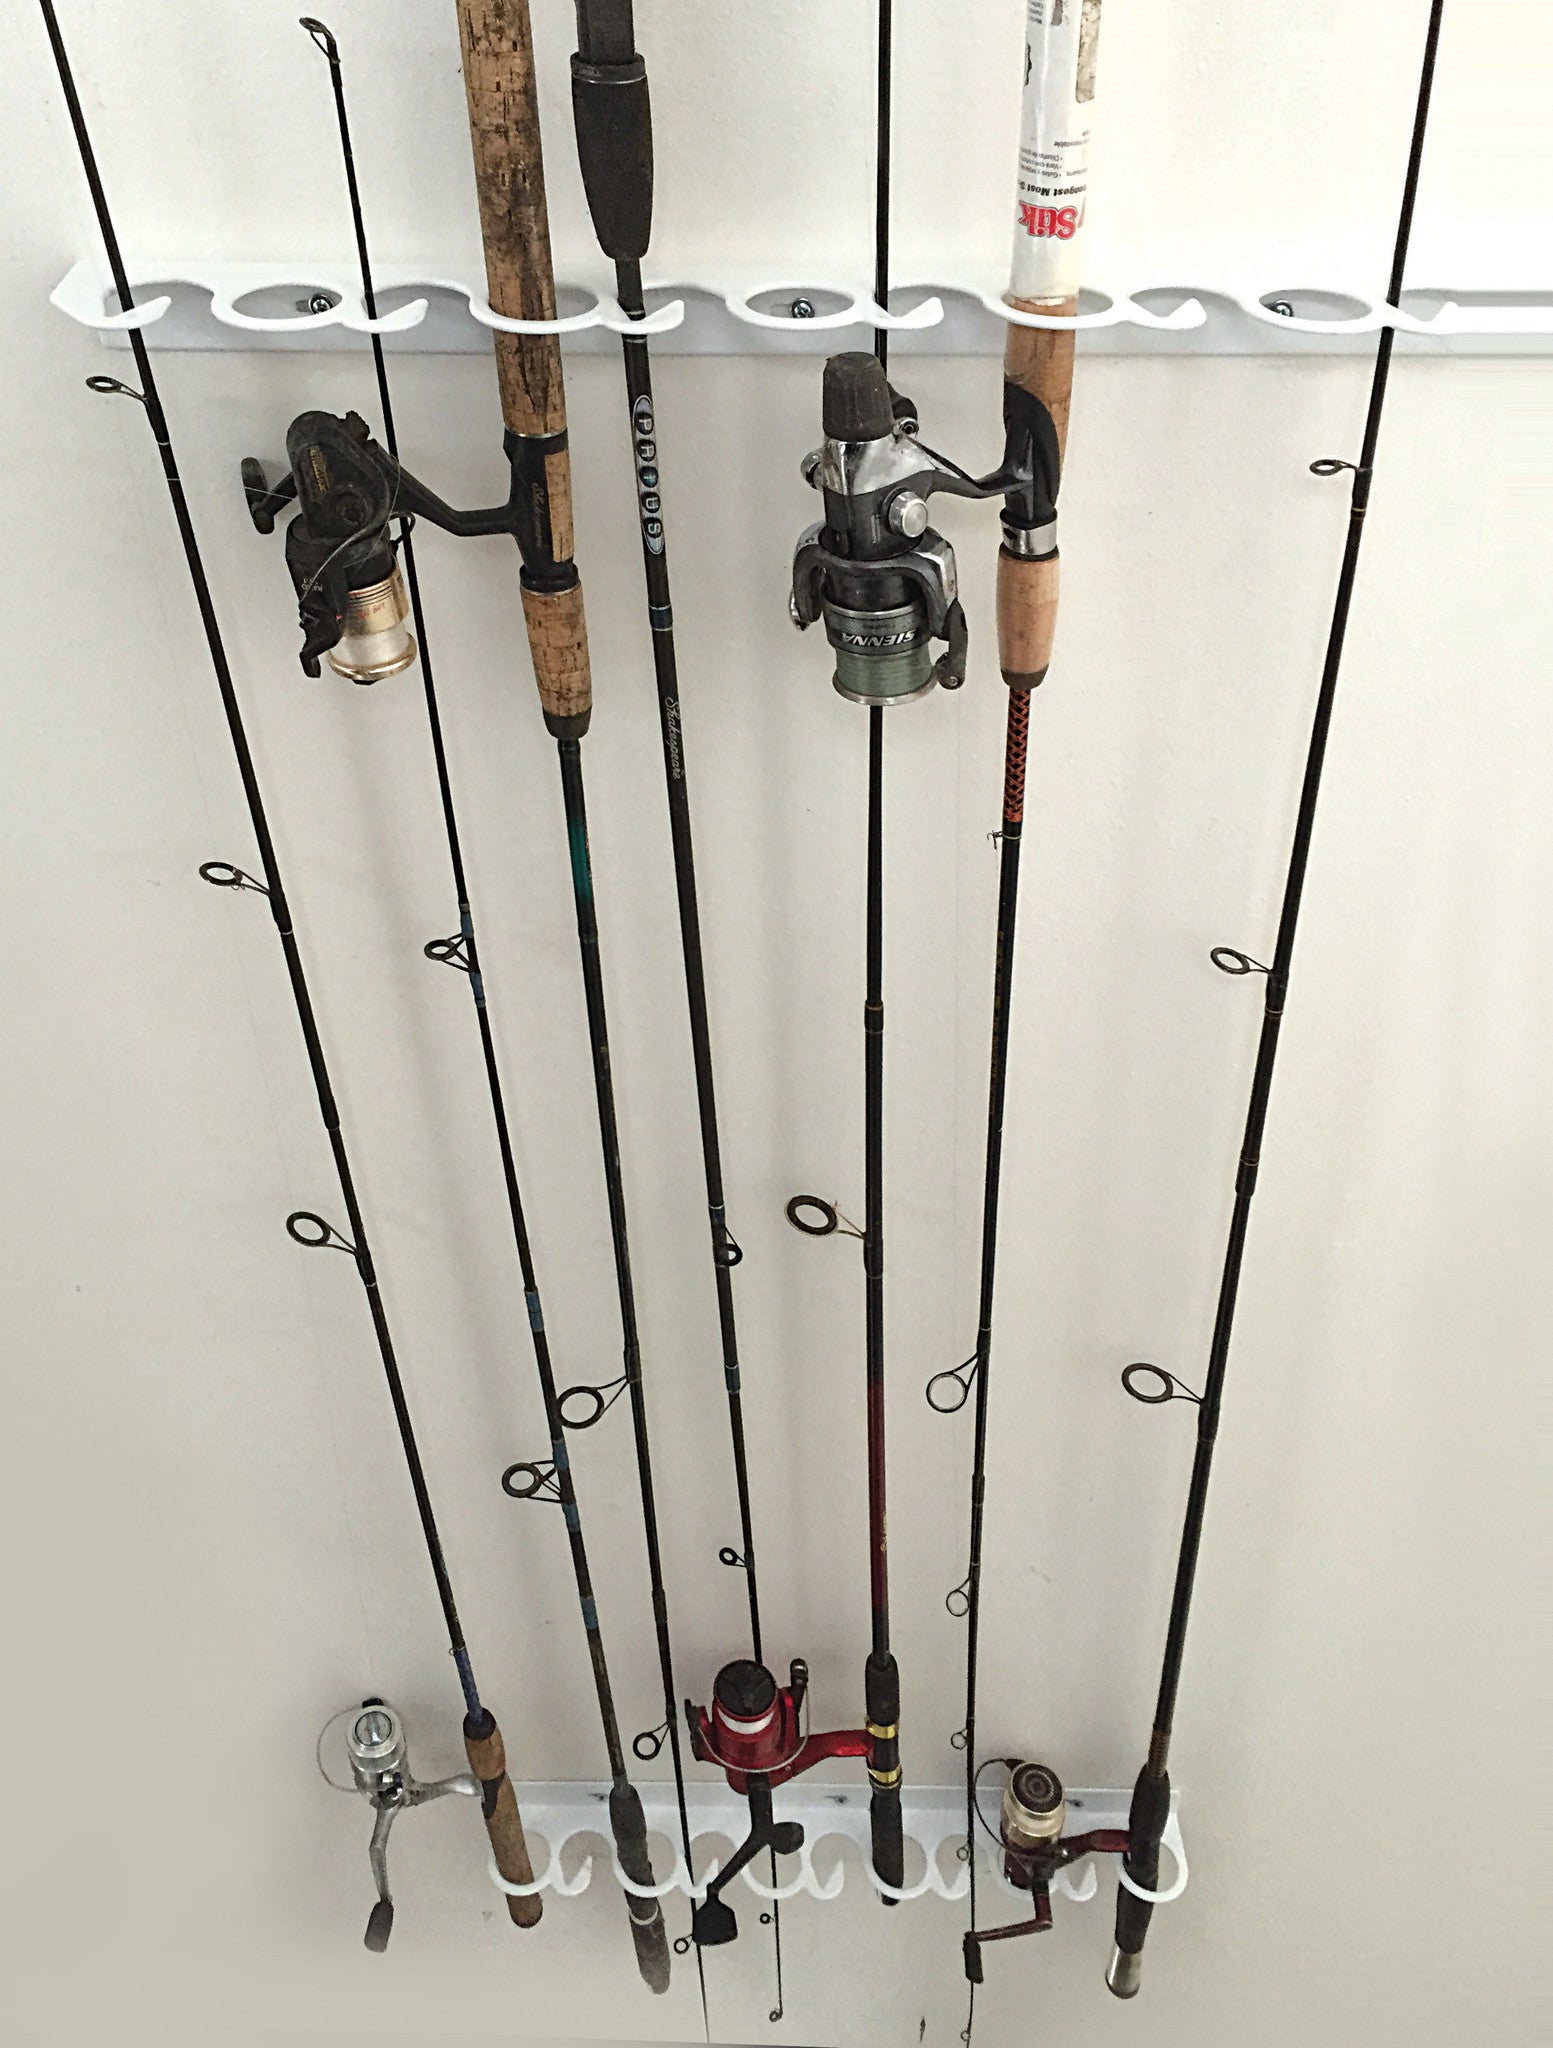 Ceiling mounted fishing pole rack. Instead of storing your fishing pol